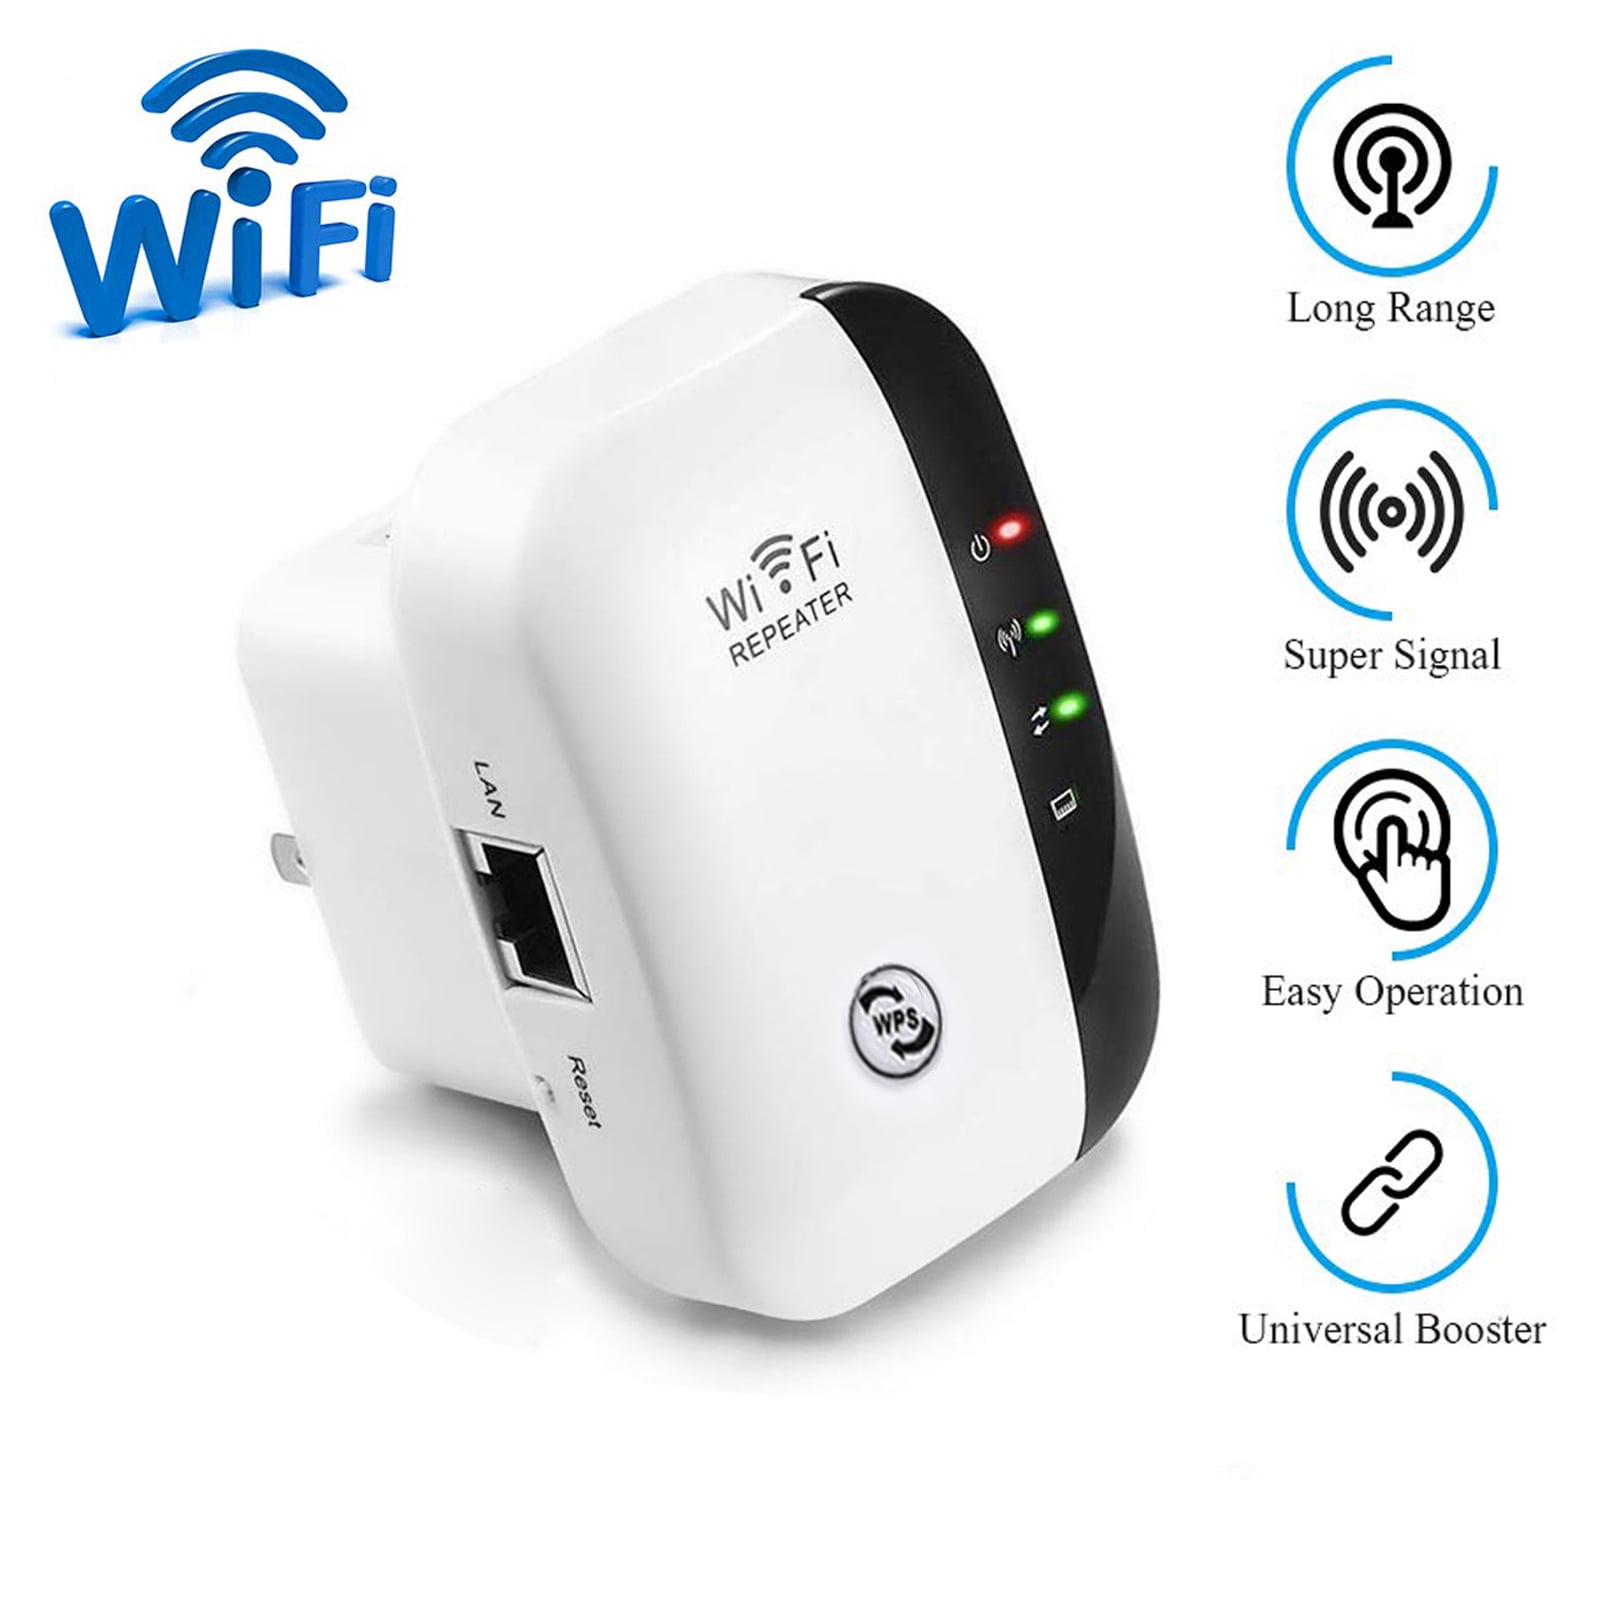 WiFi Repeater Booster WiFi Range Extender Wireless-N 300Mbps Wall Mounted Wireless Signal Booster with AP/Reapter Mode WiFi Extender